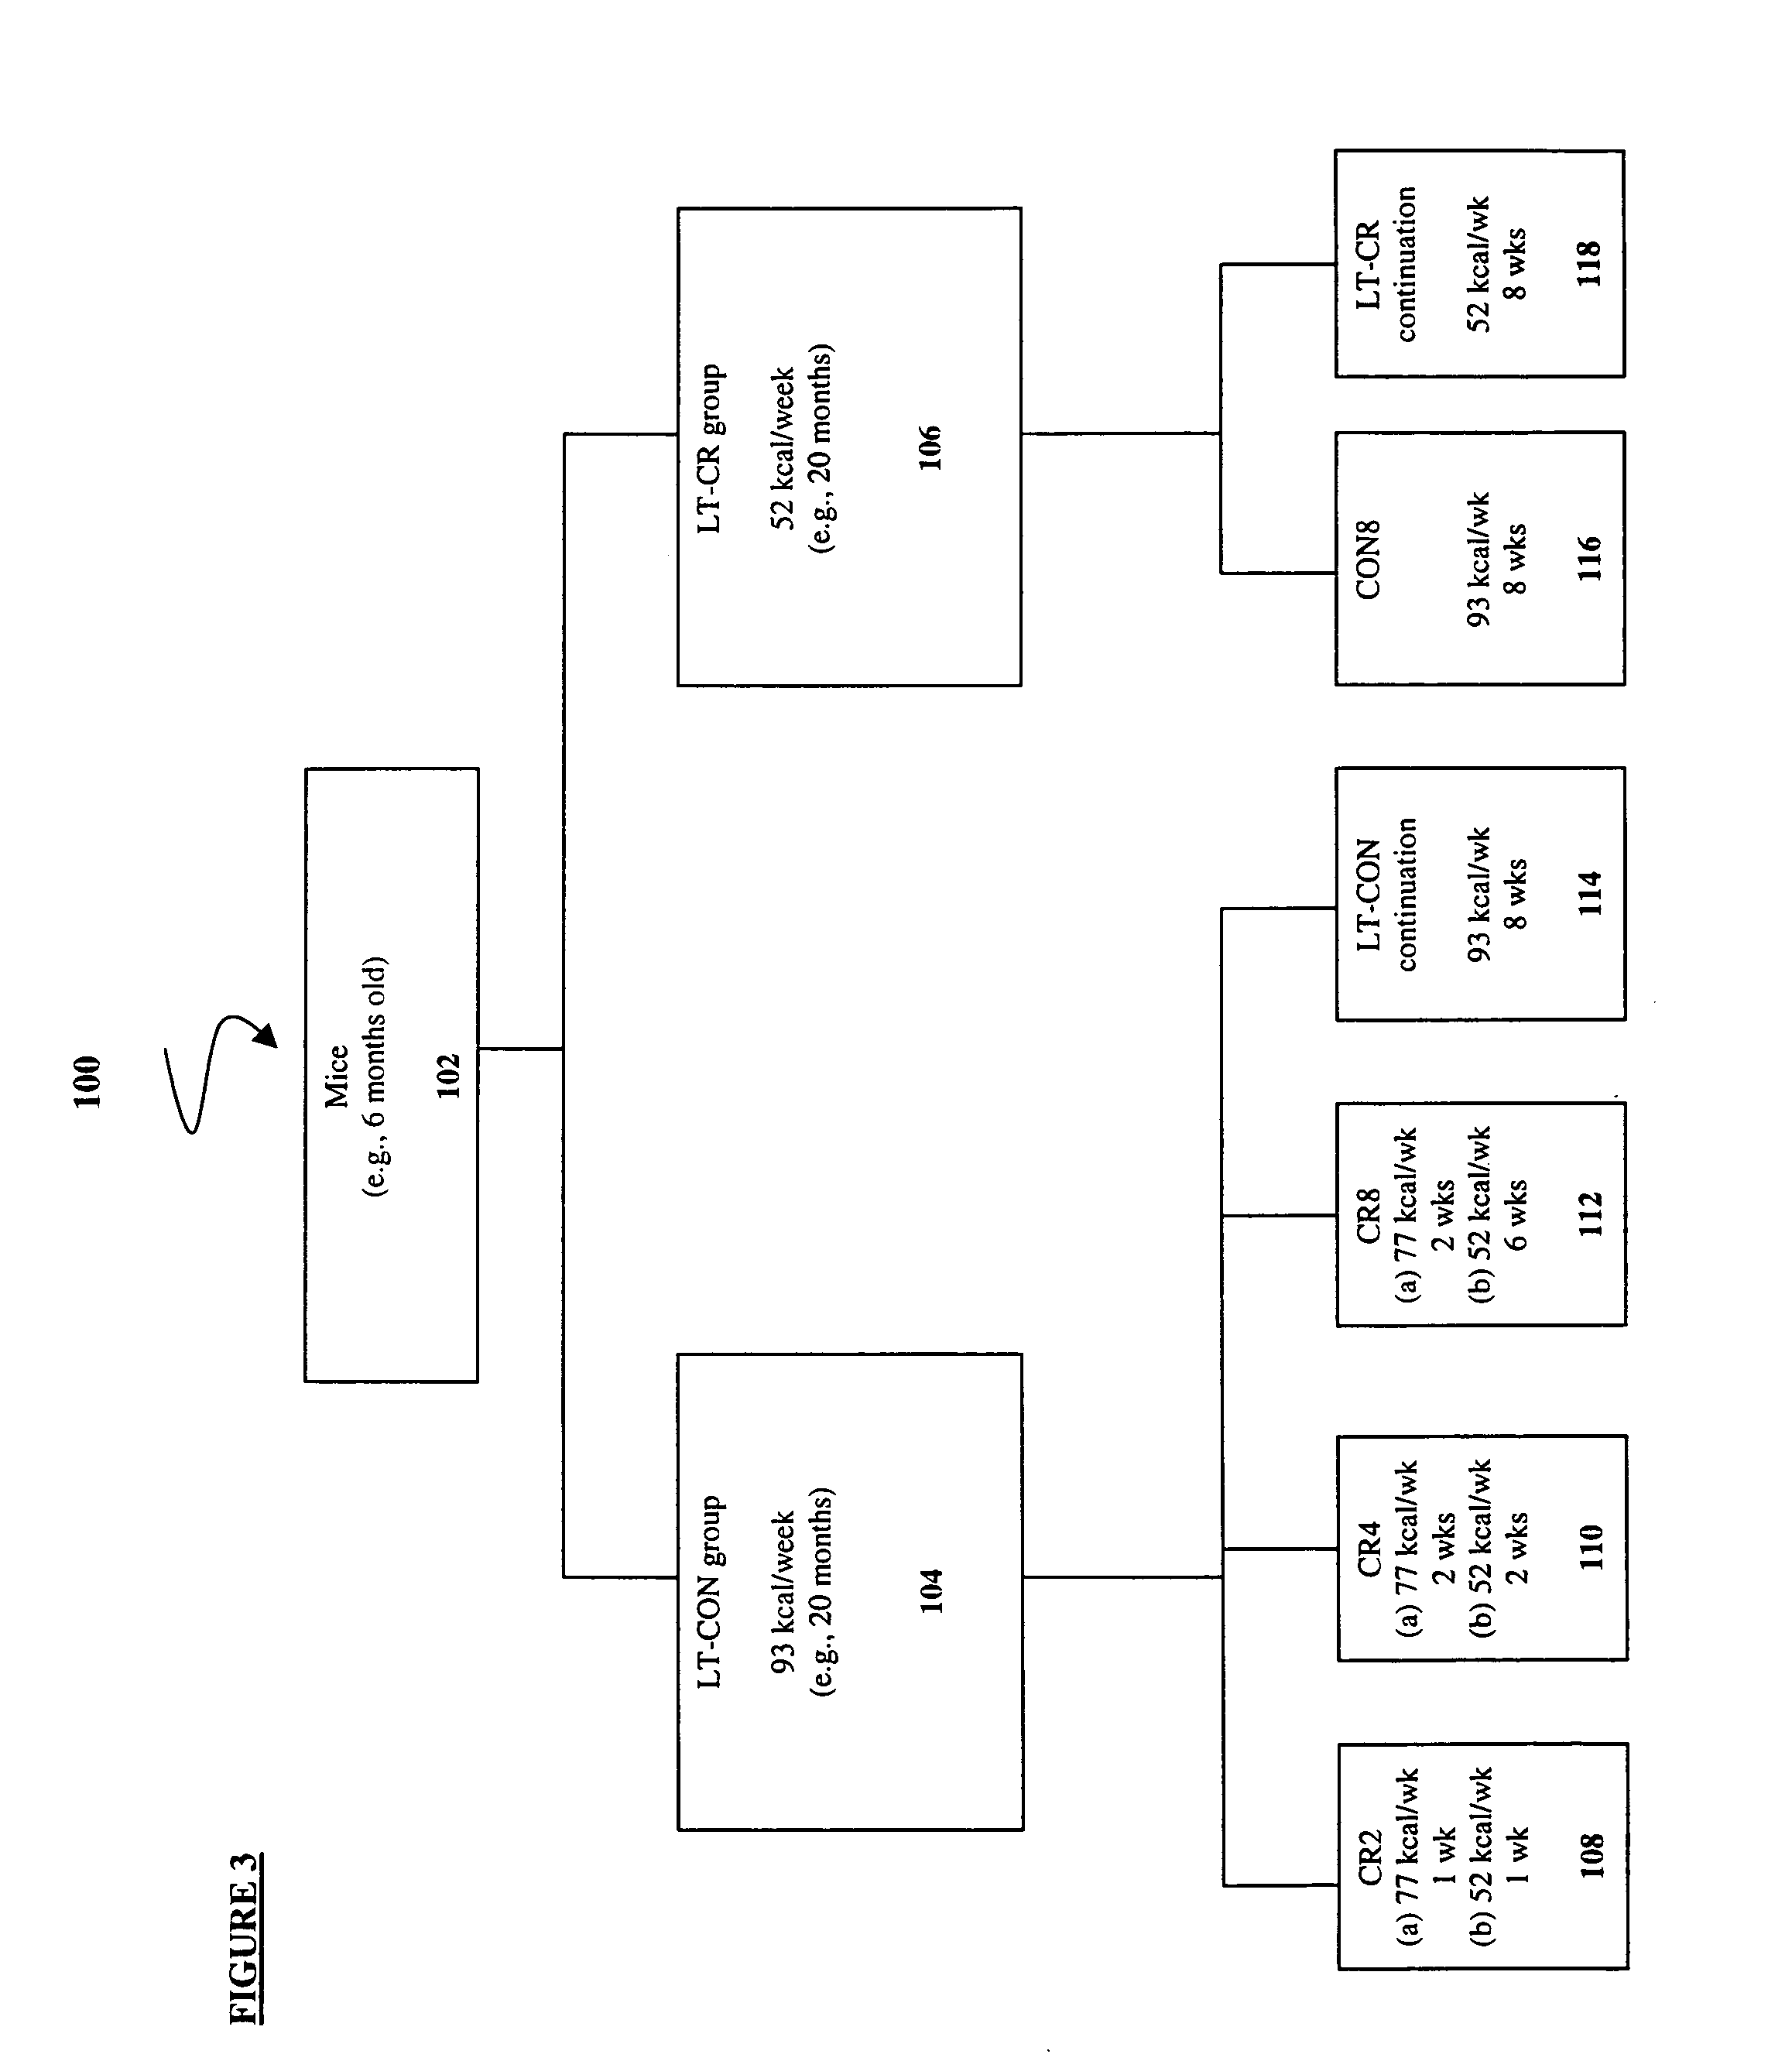 Methods of evaluating the dynamics of caloric restriction and identifying caloric restriction mimetics